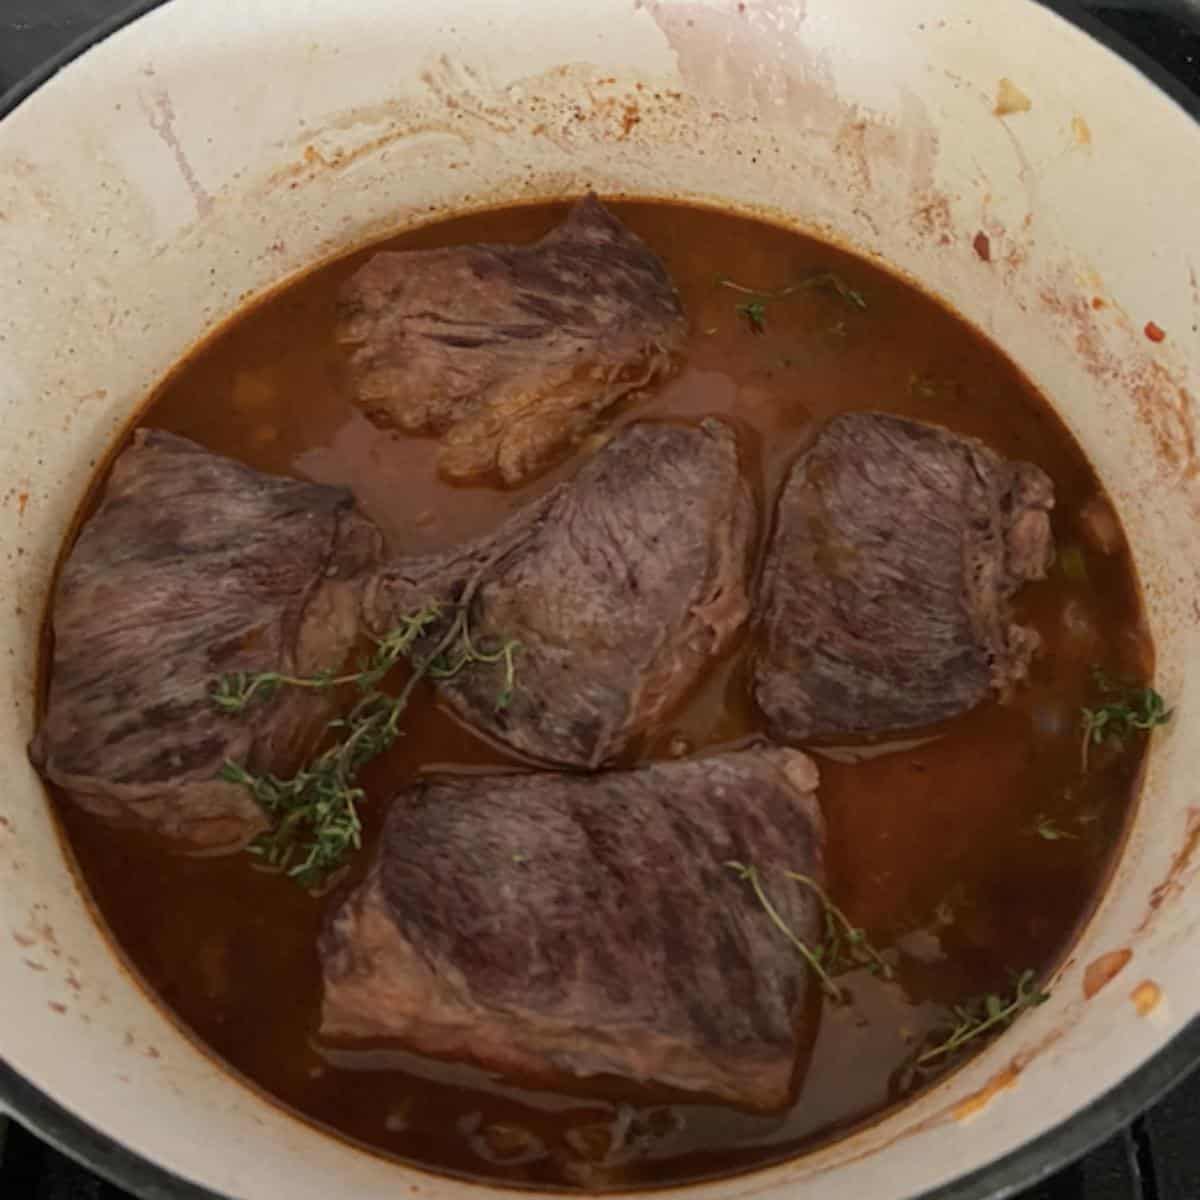 Short ribs in dutch oven ready to bake.